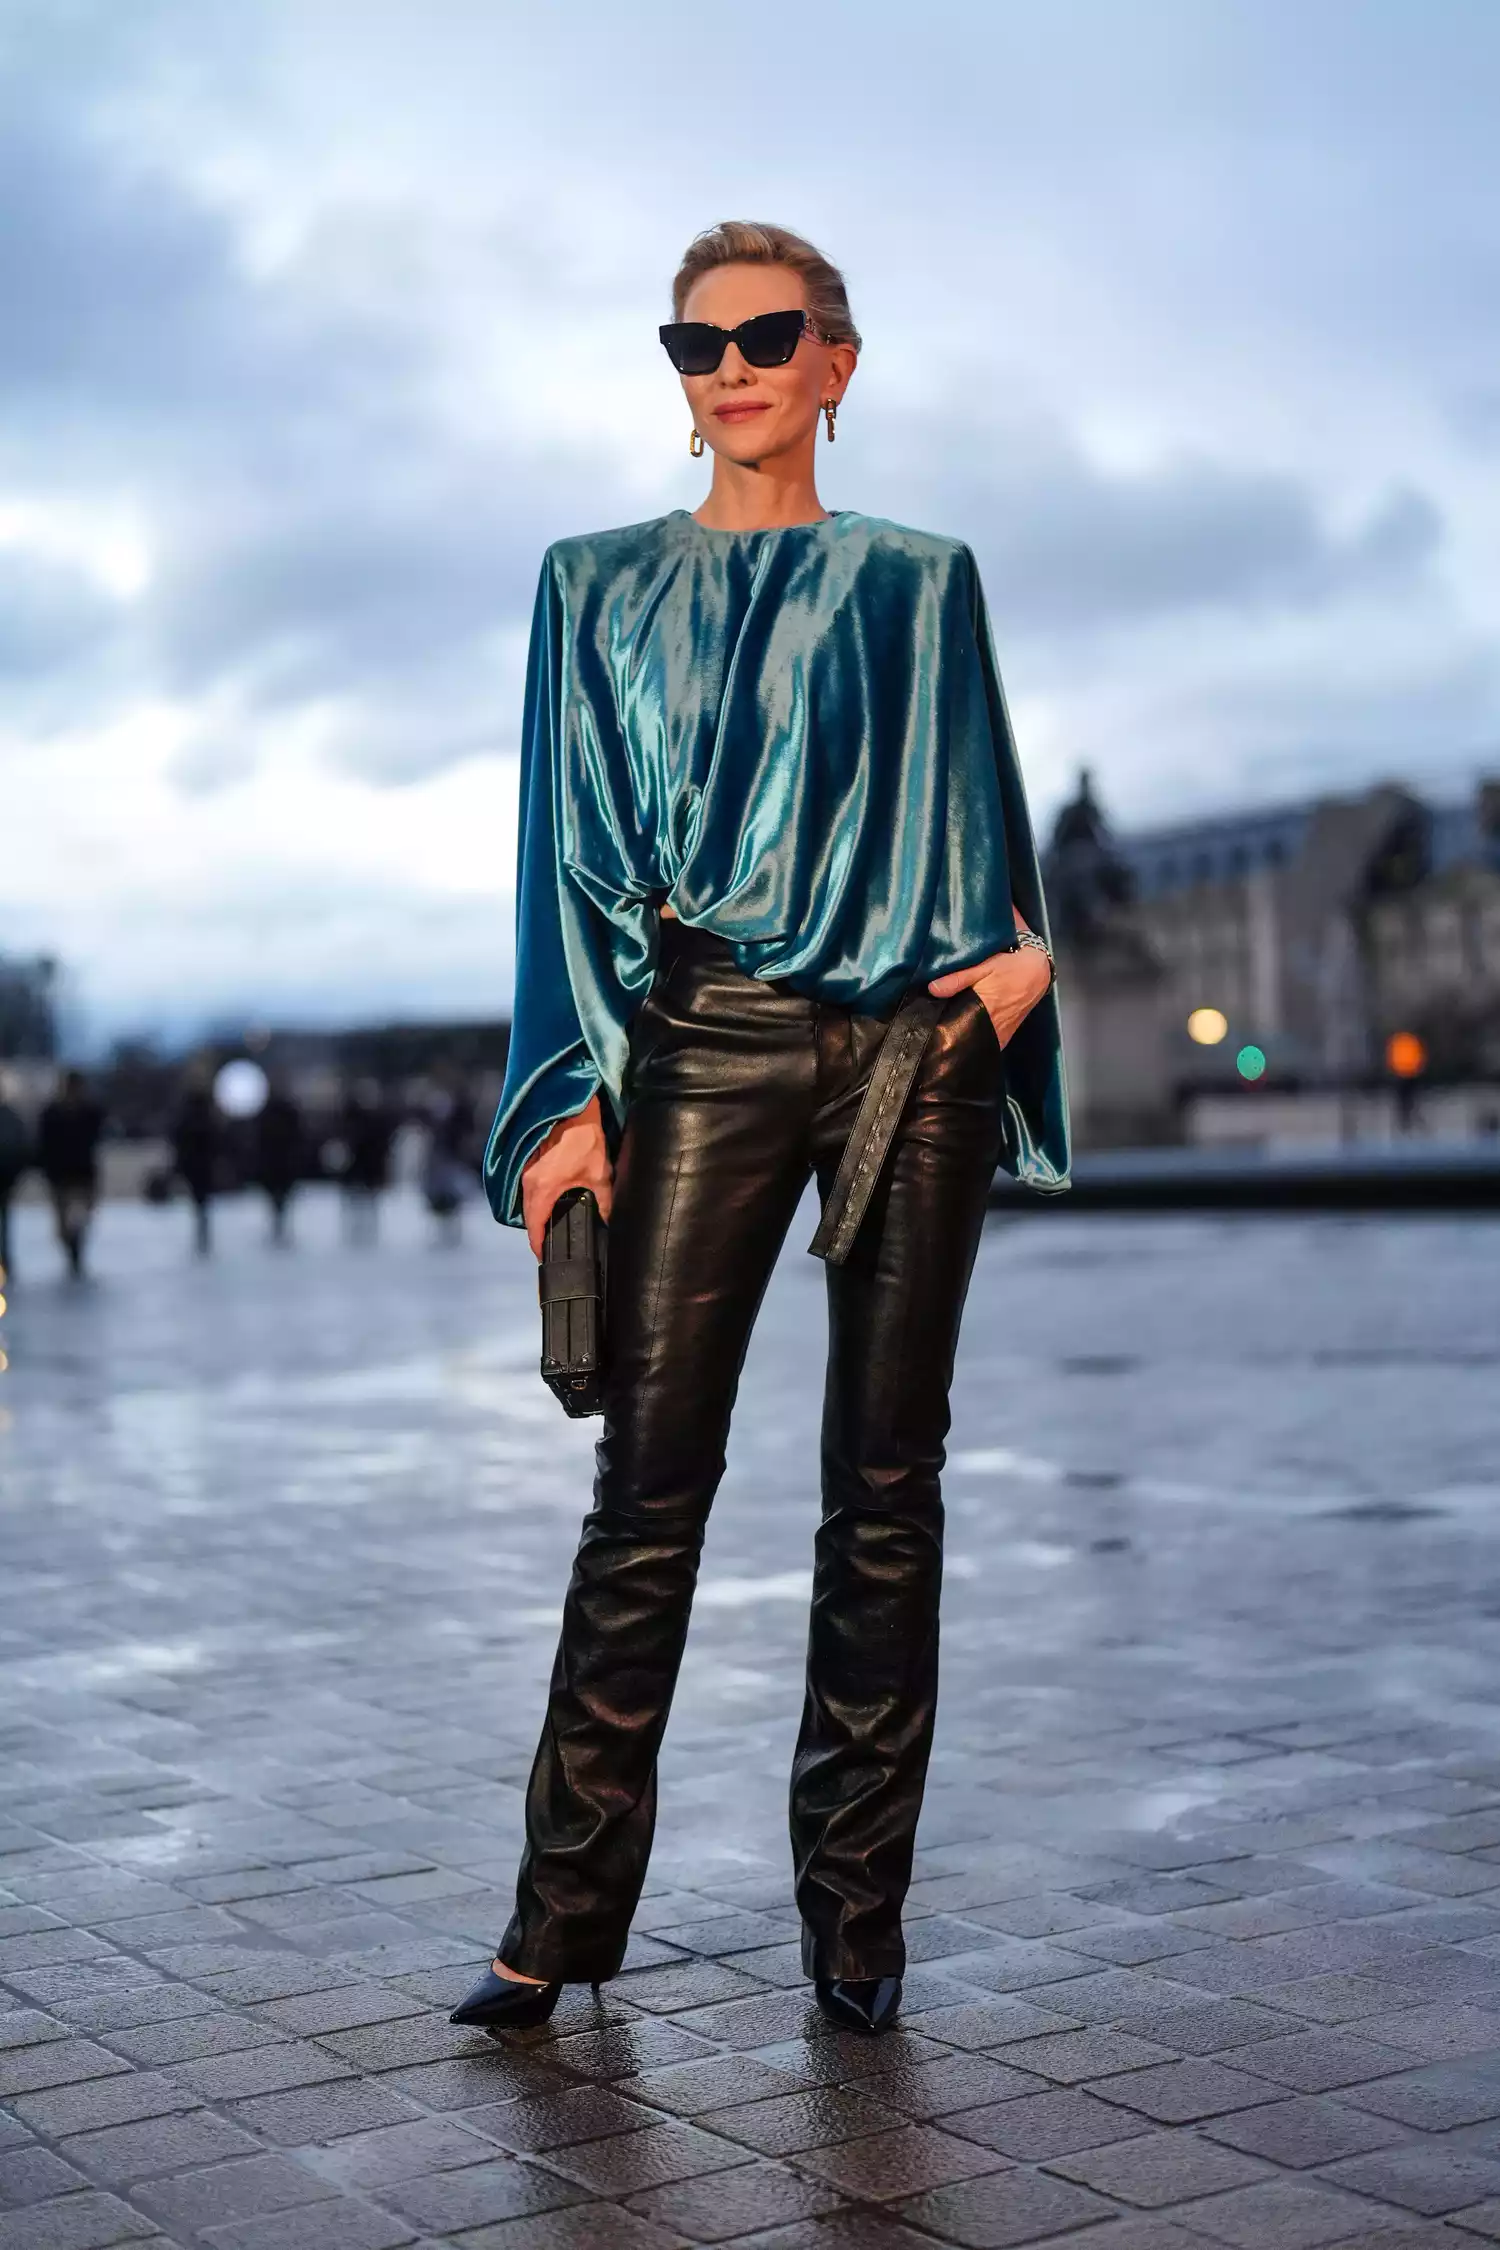 Cate Blanchett Just Rewore Her 2023 Oscars Look in Paris